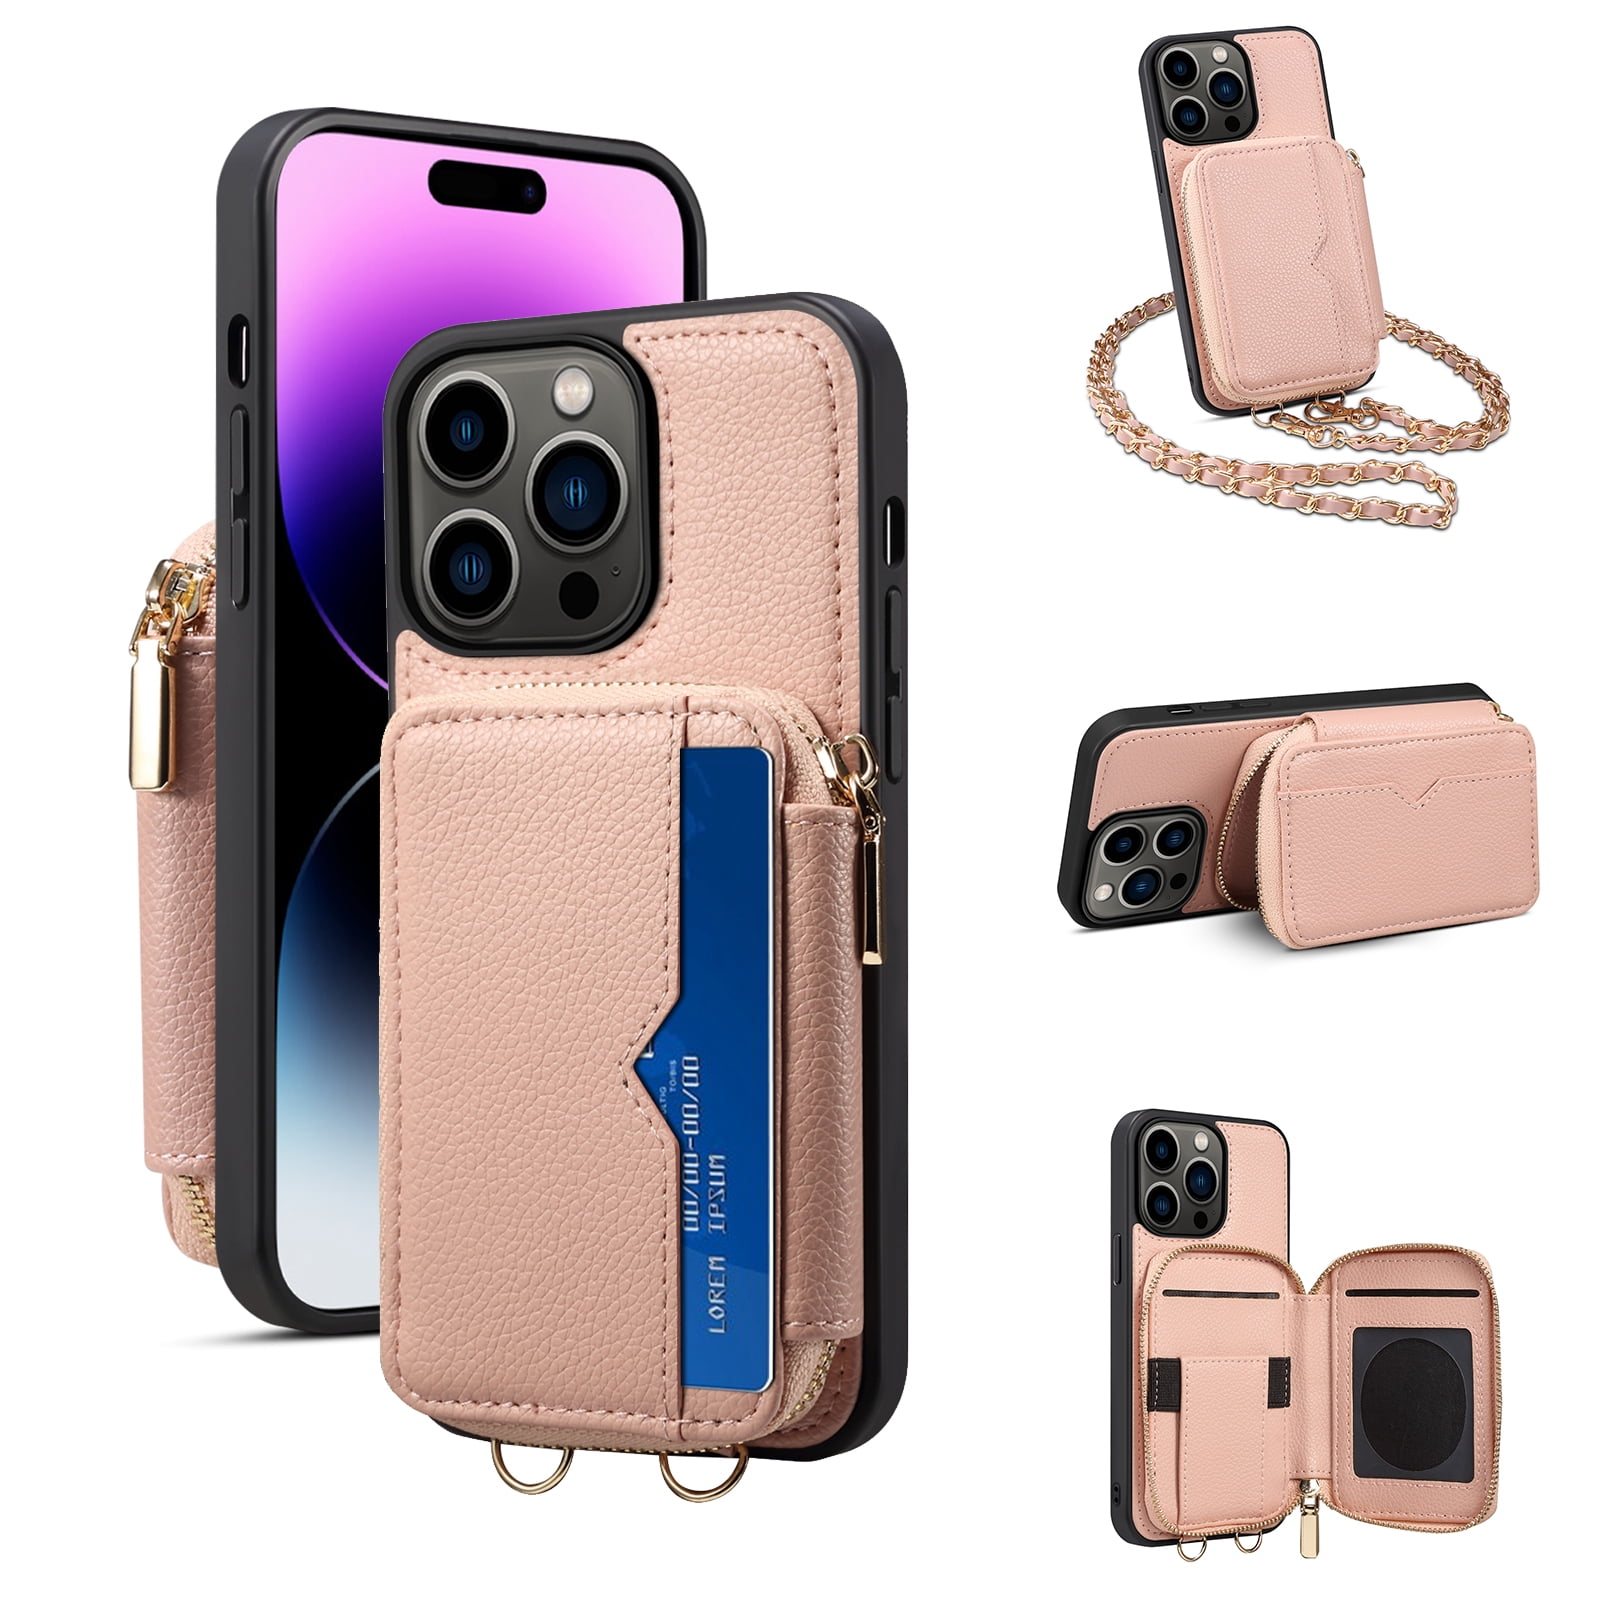 Luxury Handy Wallet Purse Leather Shockproof Case Cover For Apple iPhone  Model - Simpson Advanced Chiropractic & Medical Center